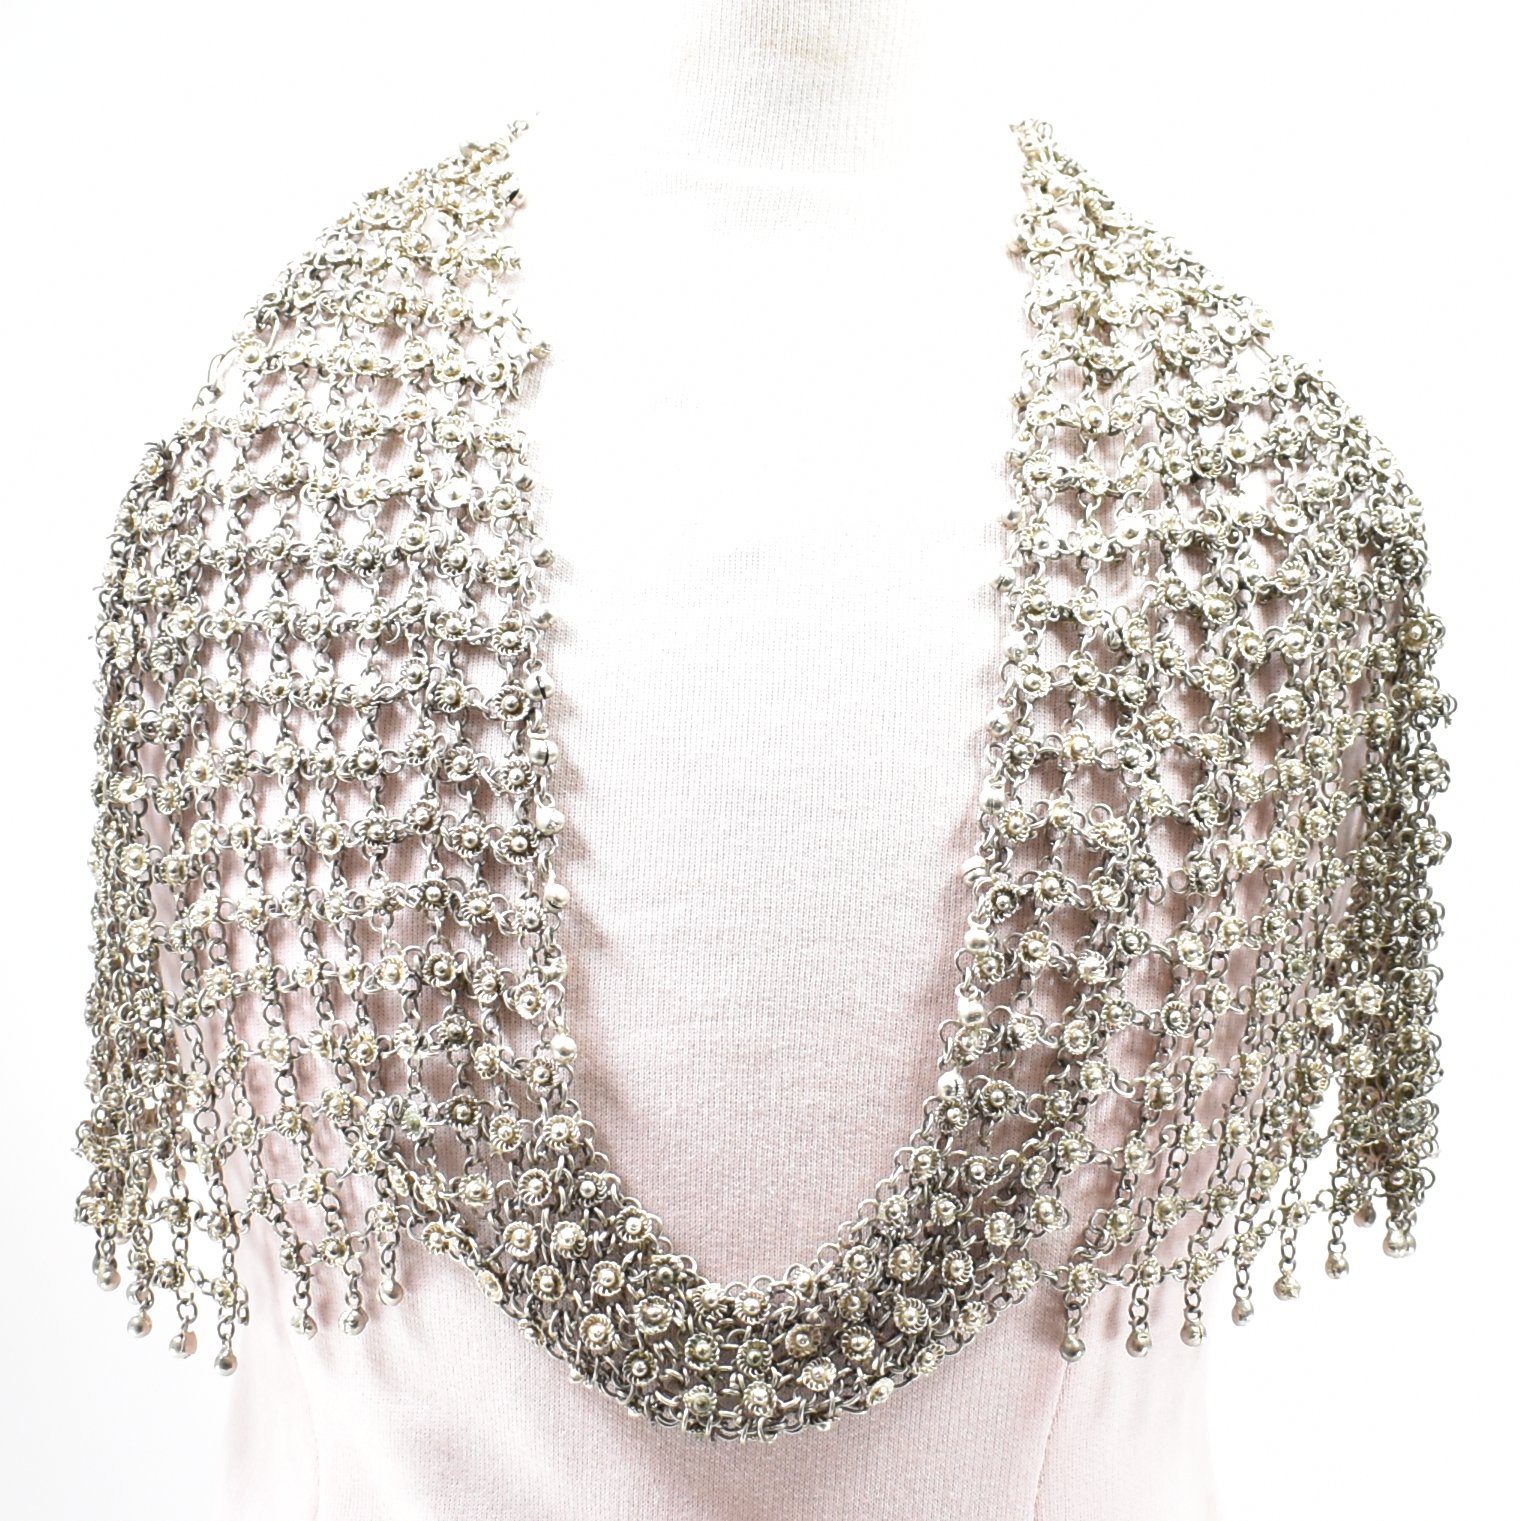 CHAINMAIL WHITE METAL BELLY DANCER TOP - Image 6 of 8